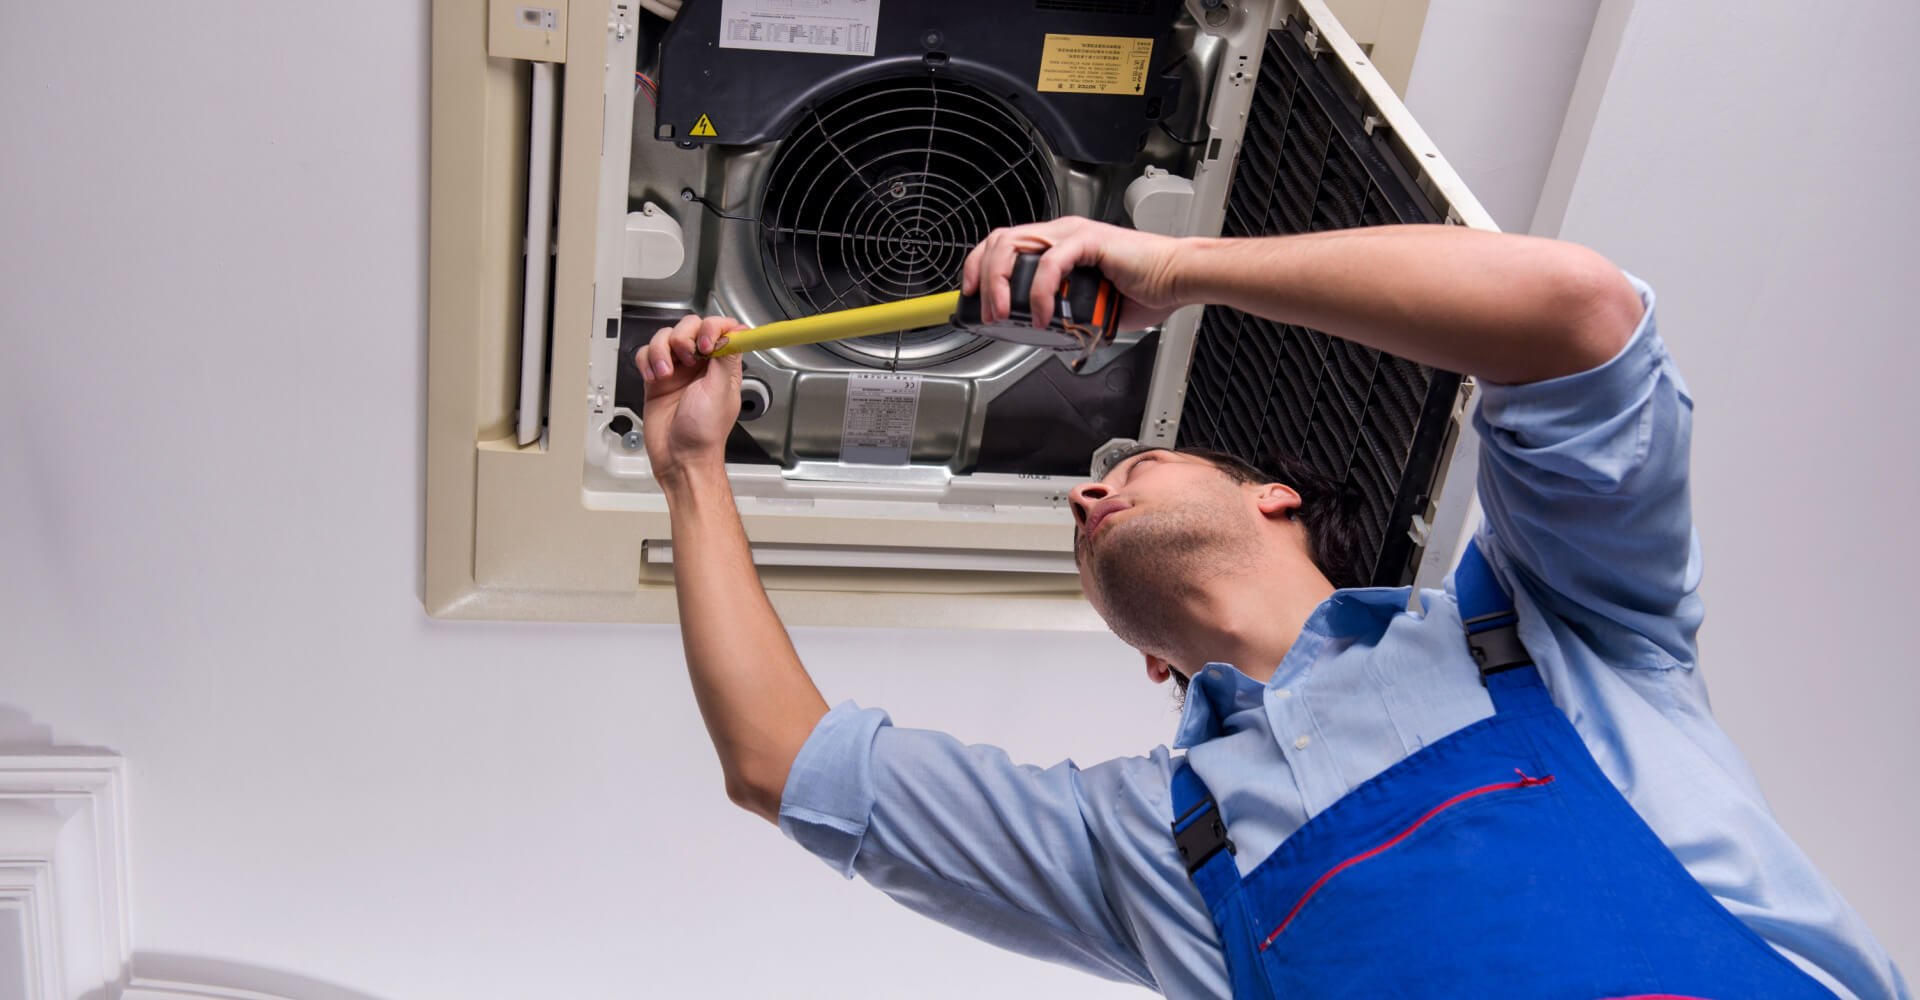 What Regular Maintenance Should Be Done On An Air Conditioner?